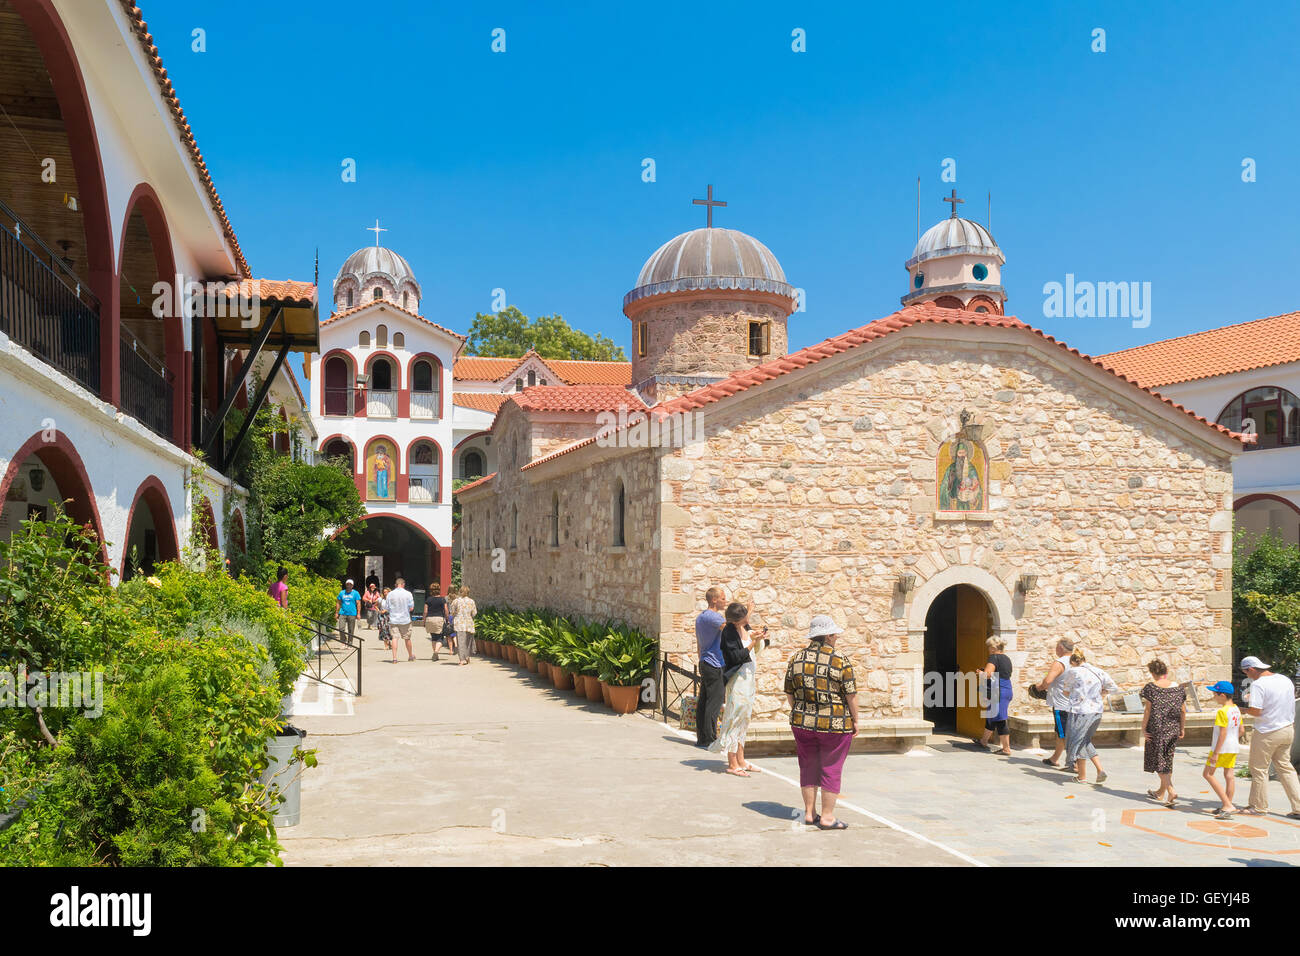 Evia, Greece 25 July 201. People from all over the world visiting the famous monastery of Saint David at Evia. Stock Photo